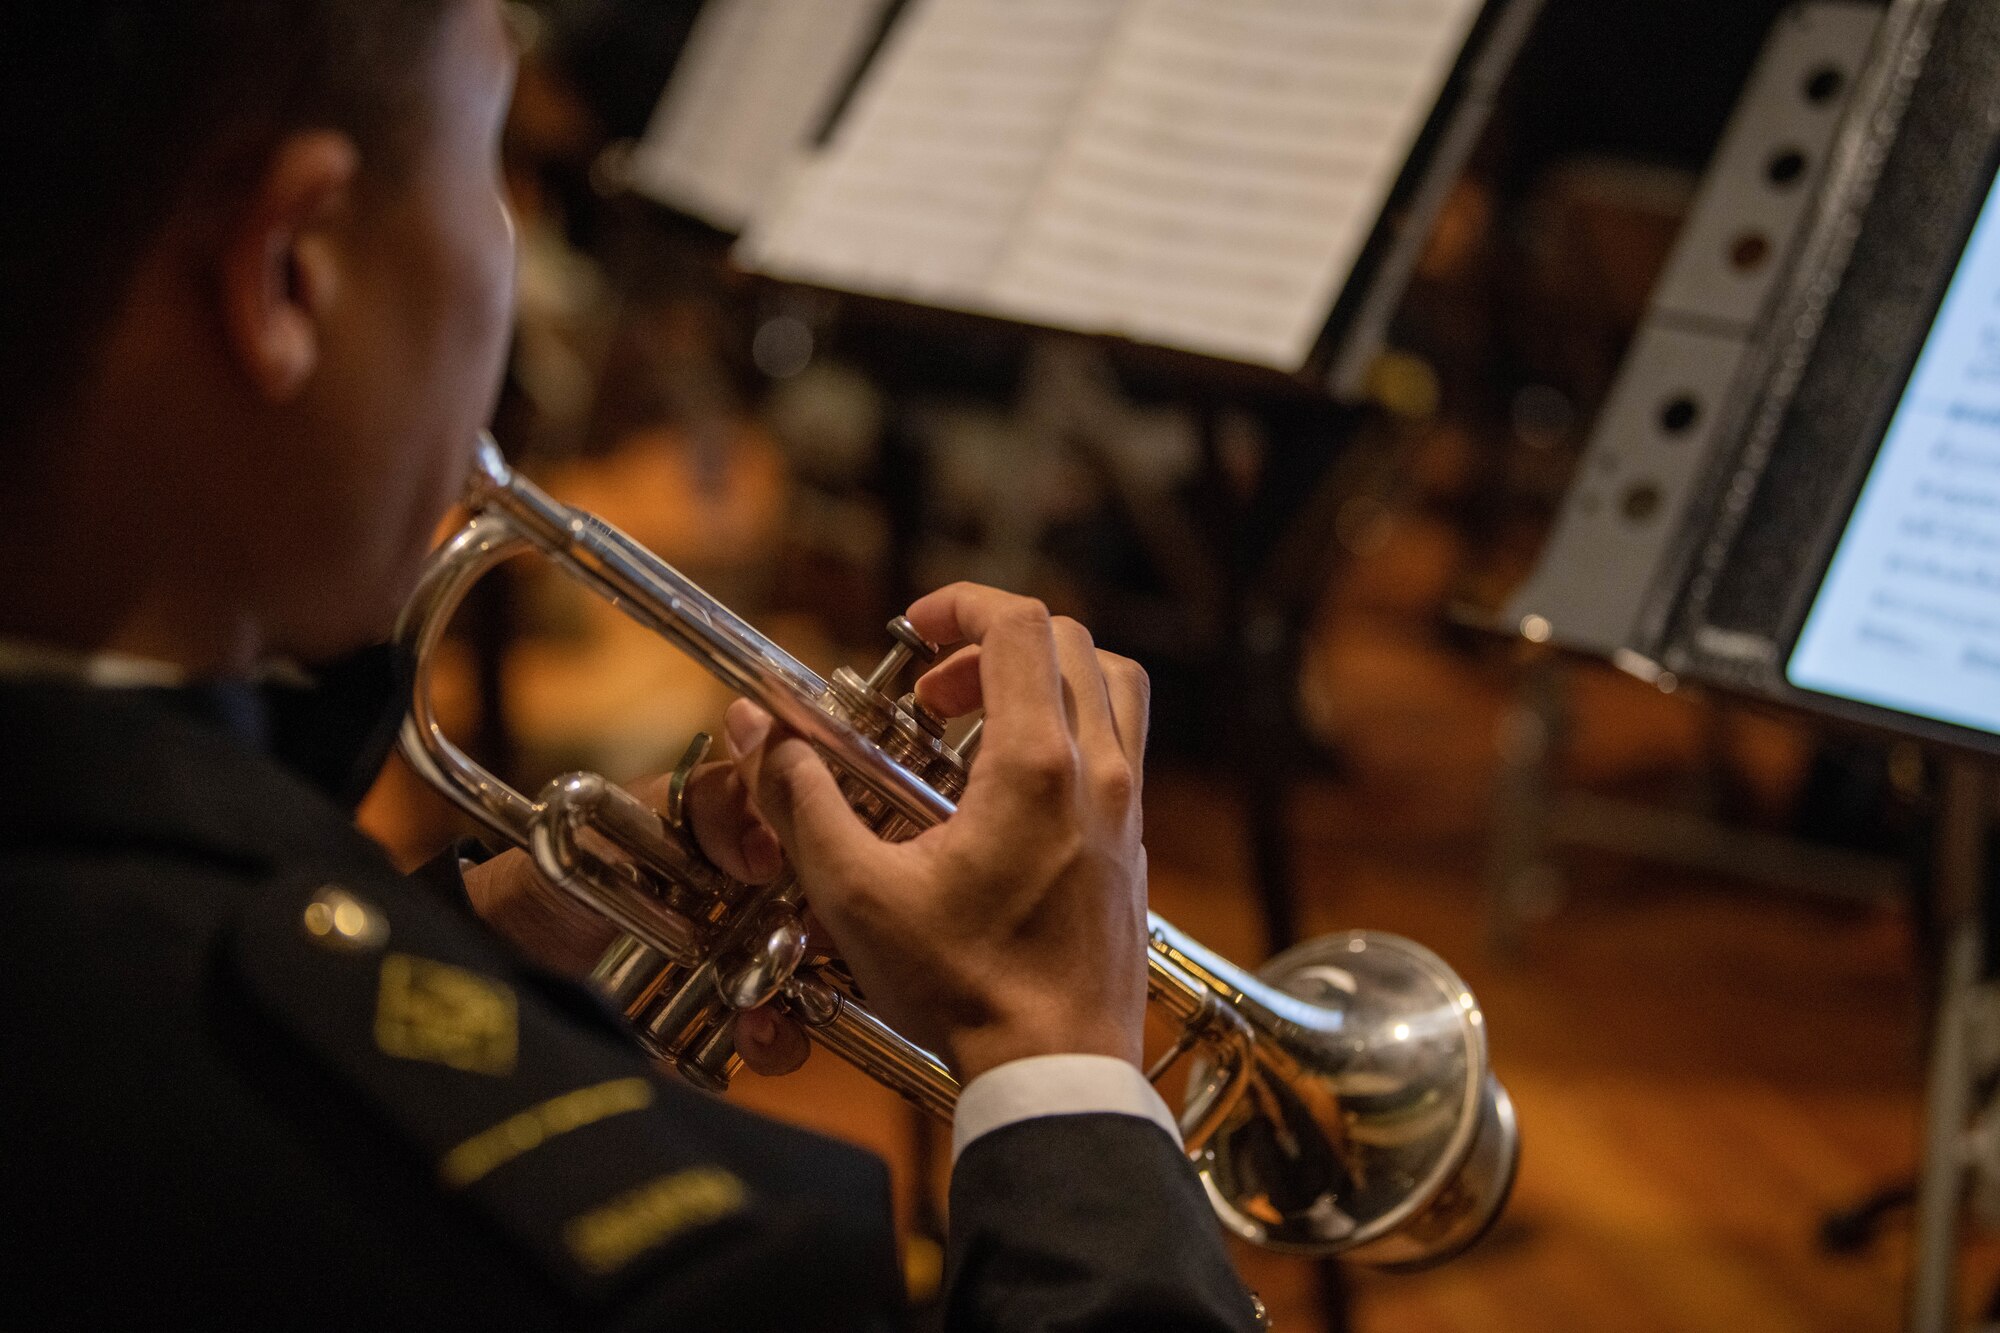 Singapore Armed Forces Central Band member performs for U.S. Airmen and Republic of Singapore Air Force service members during a RSAF Peace Carvin II 30th Anniversary celebration event April 28, 2023, at Luke Air Force Base, Arizona.